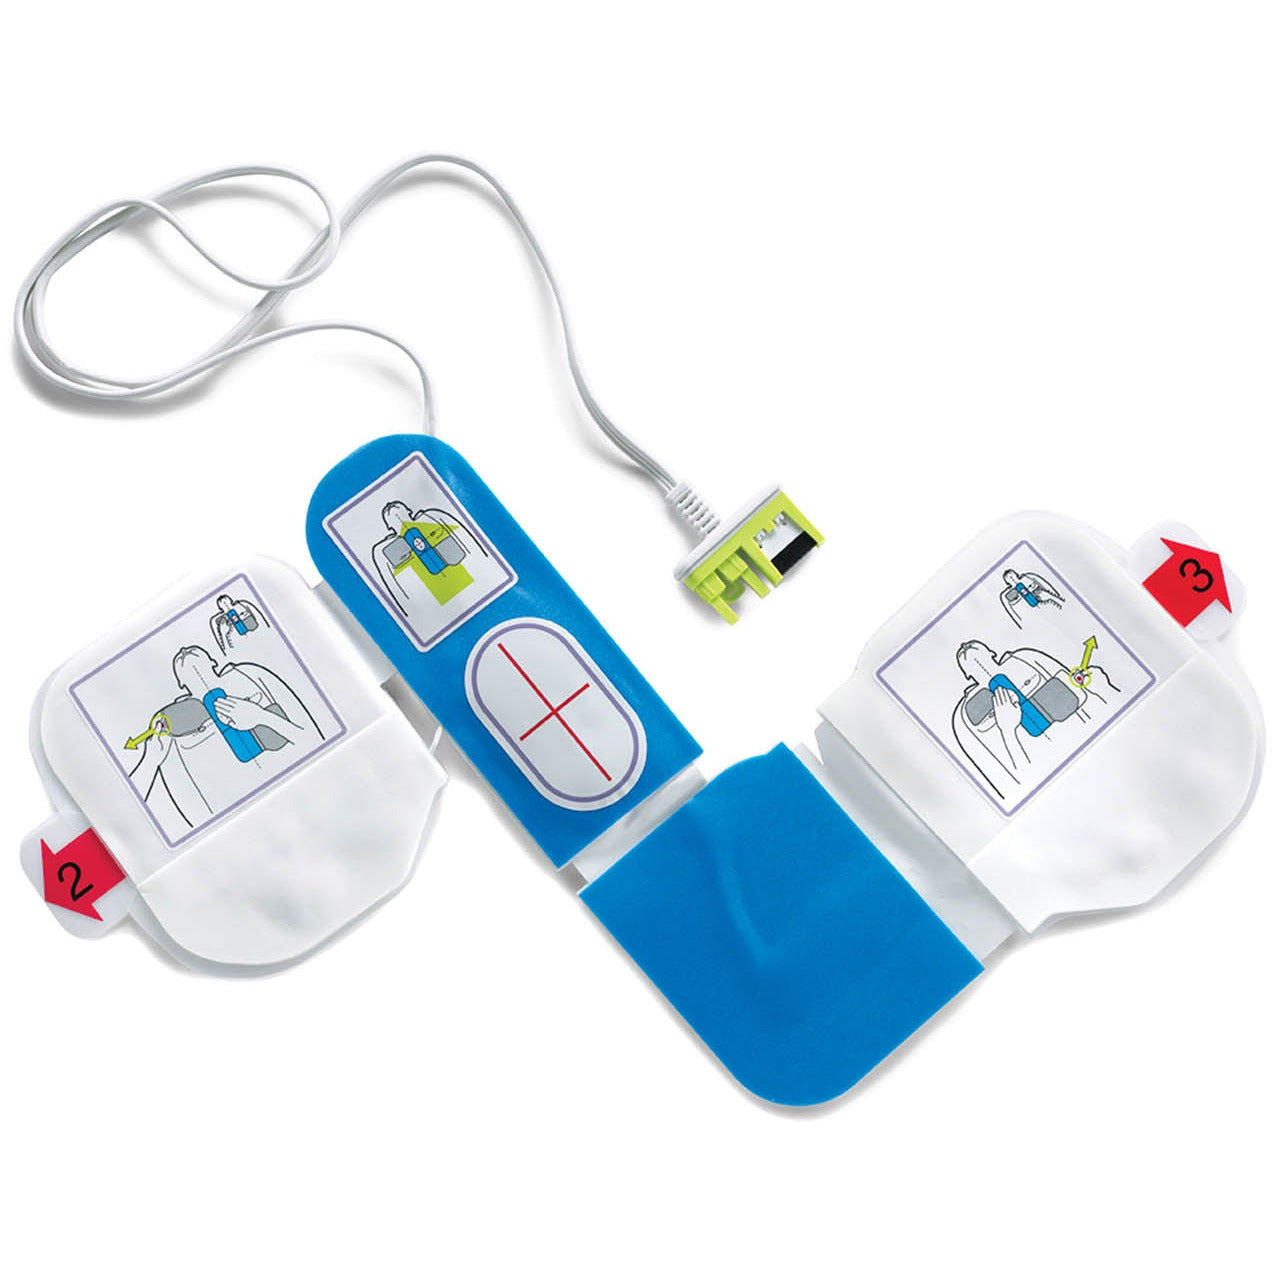 Zoll AED Plus Defibrillator,  Fully Automatic, Lay Responder